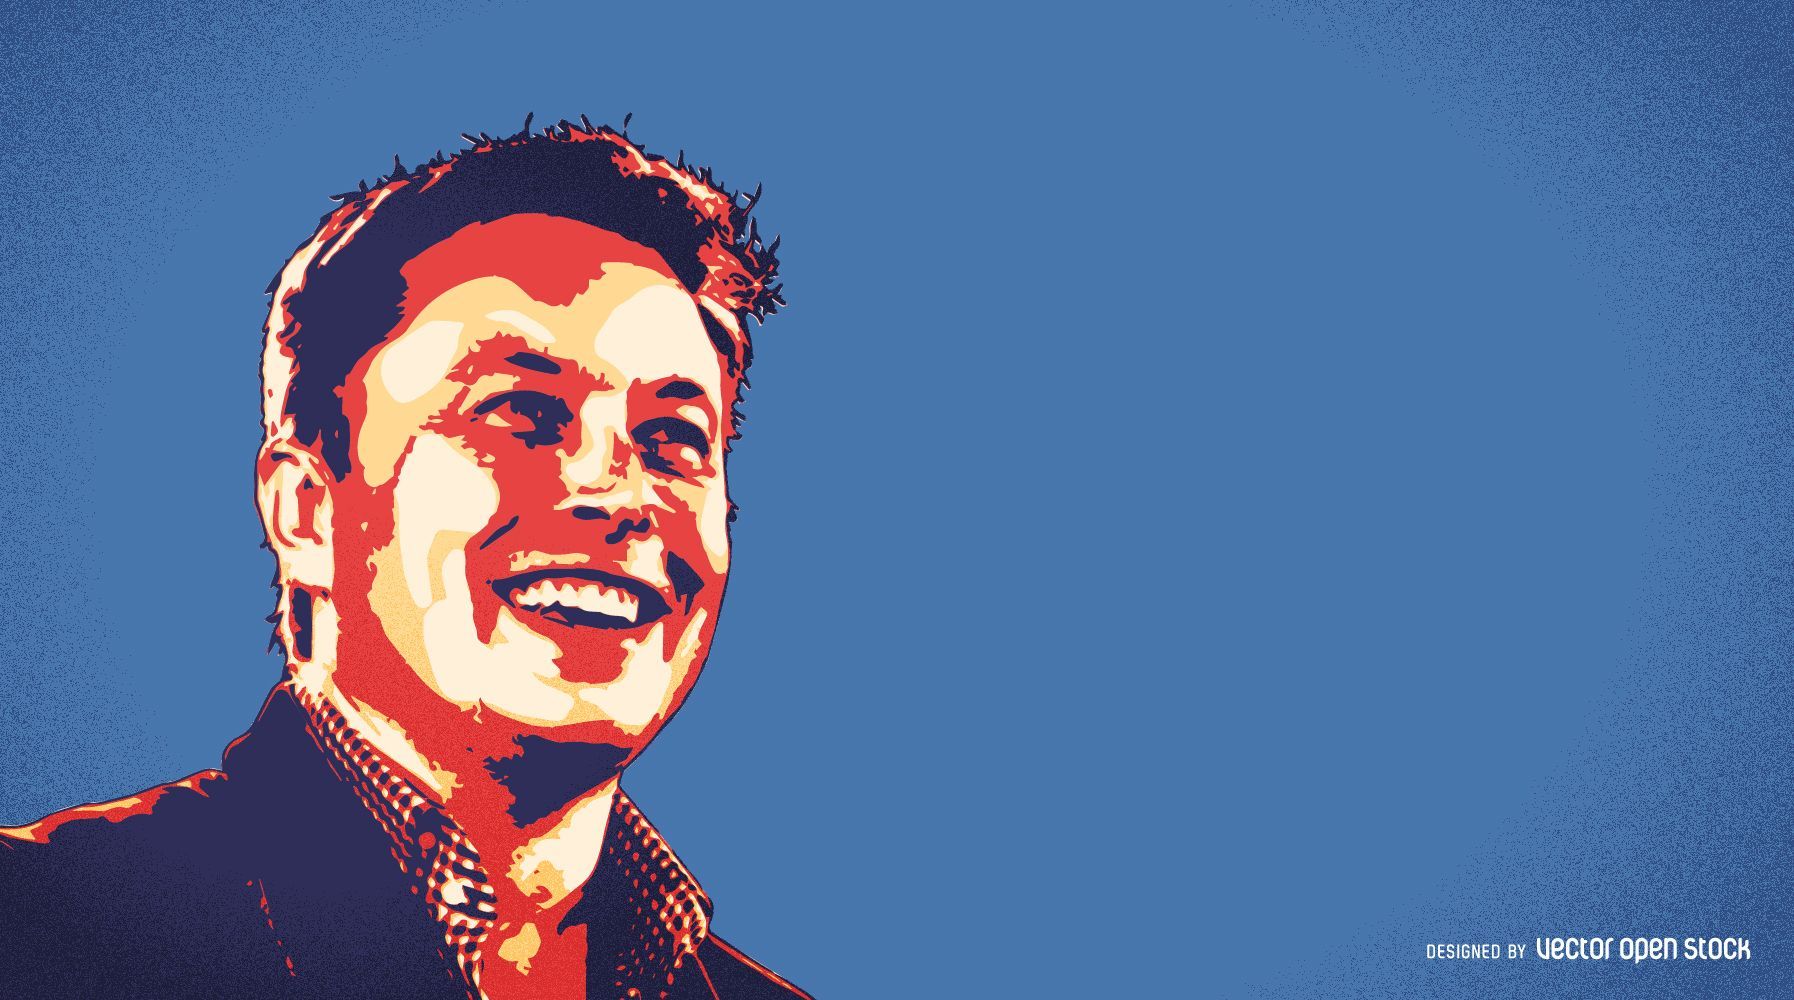 Elon Musk illustration in tones of blue, red and yellow. This design shows Elon Musk smiling and includes plenty of sp. Elon musk, Illustration, Best wallpaper hd